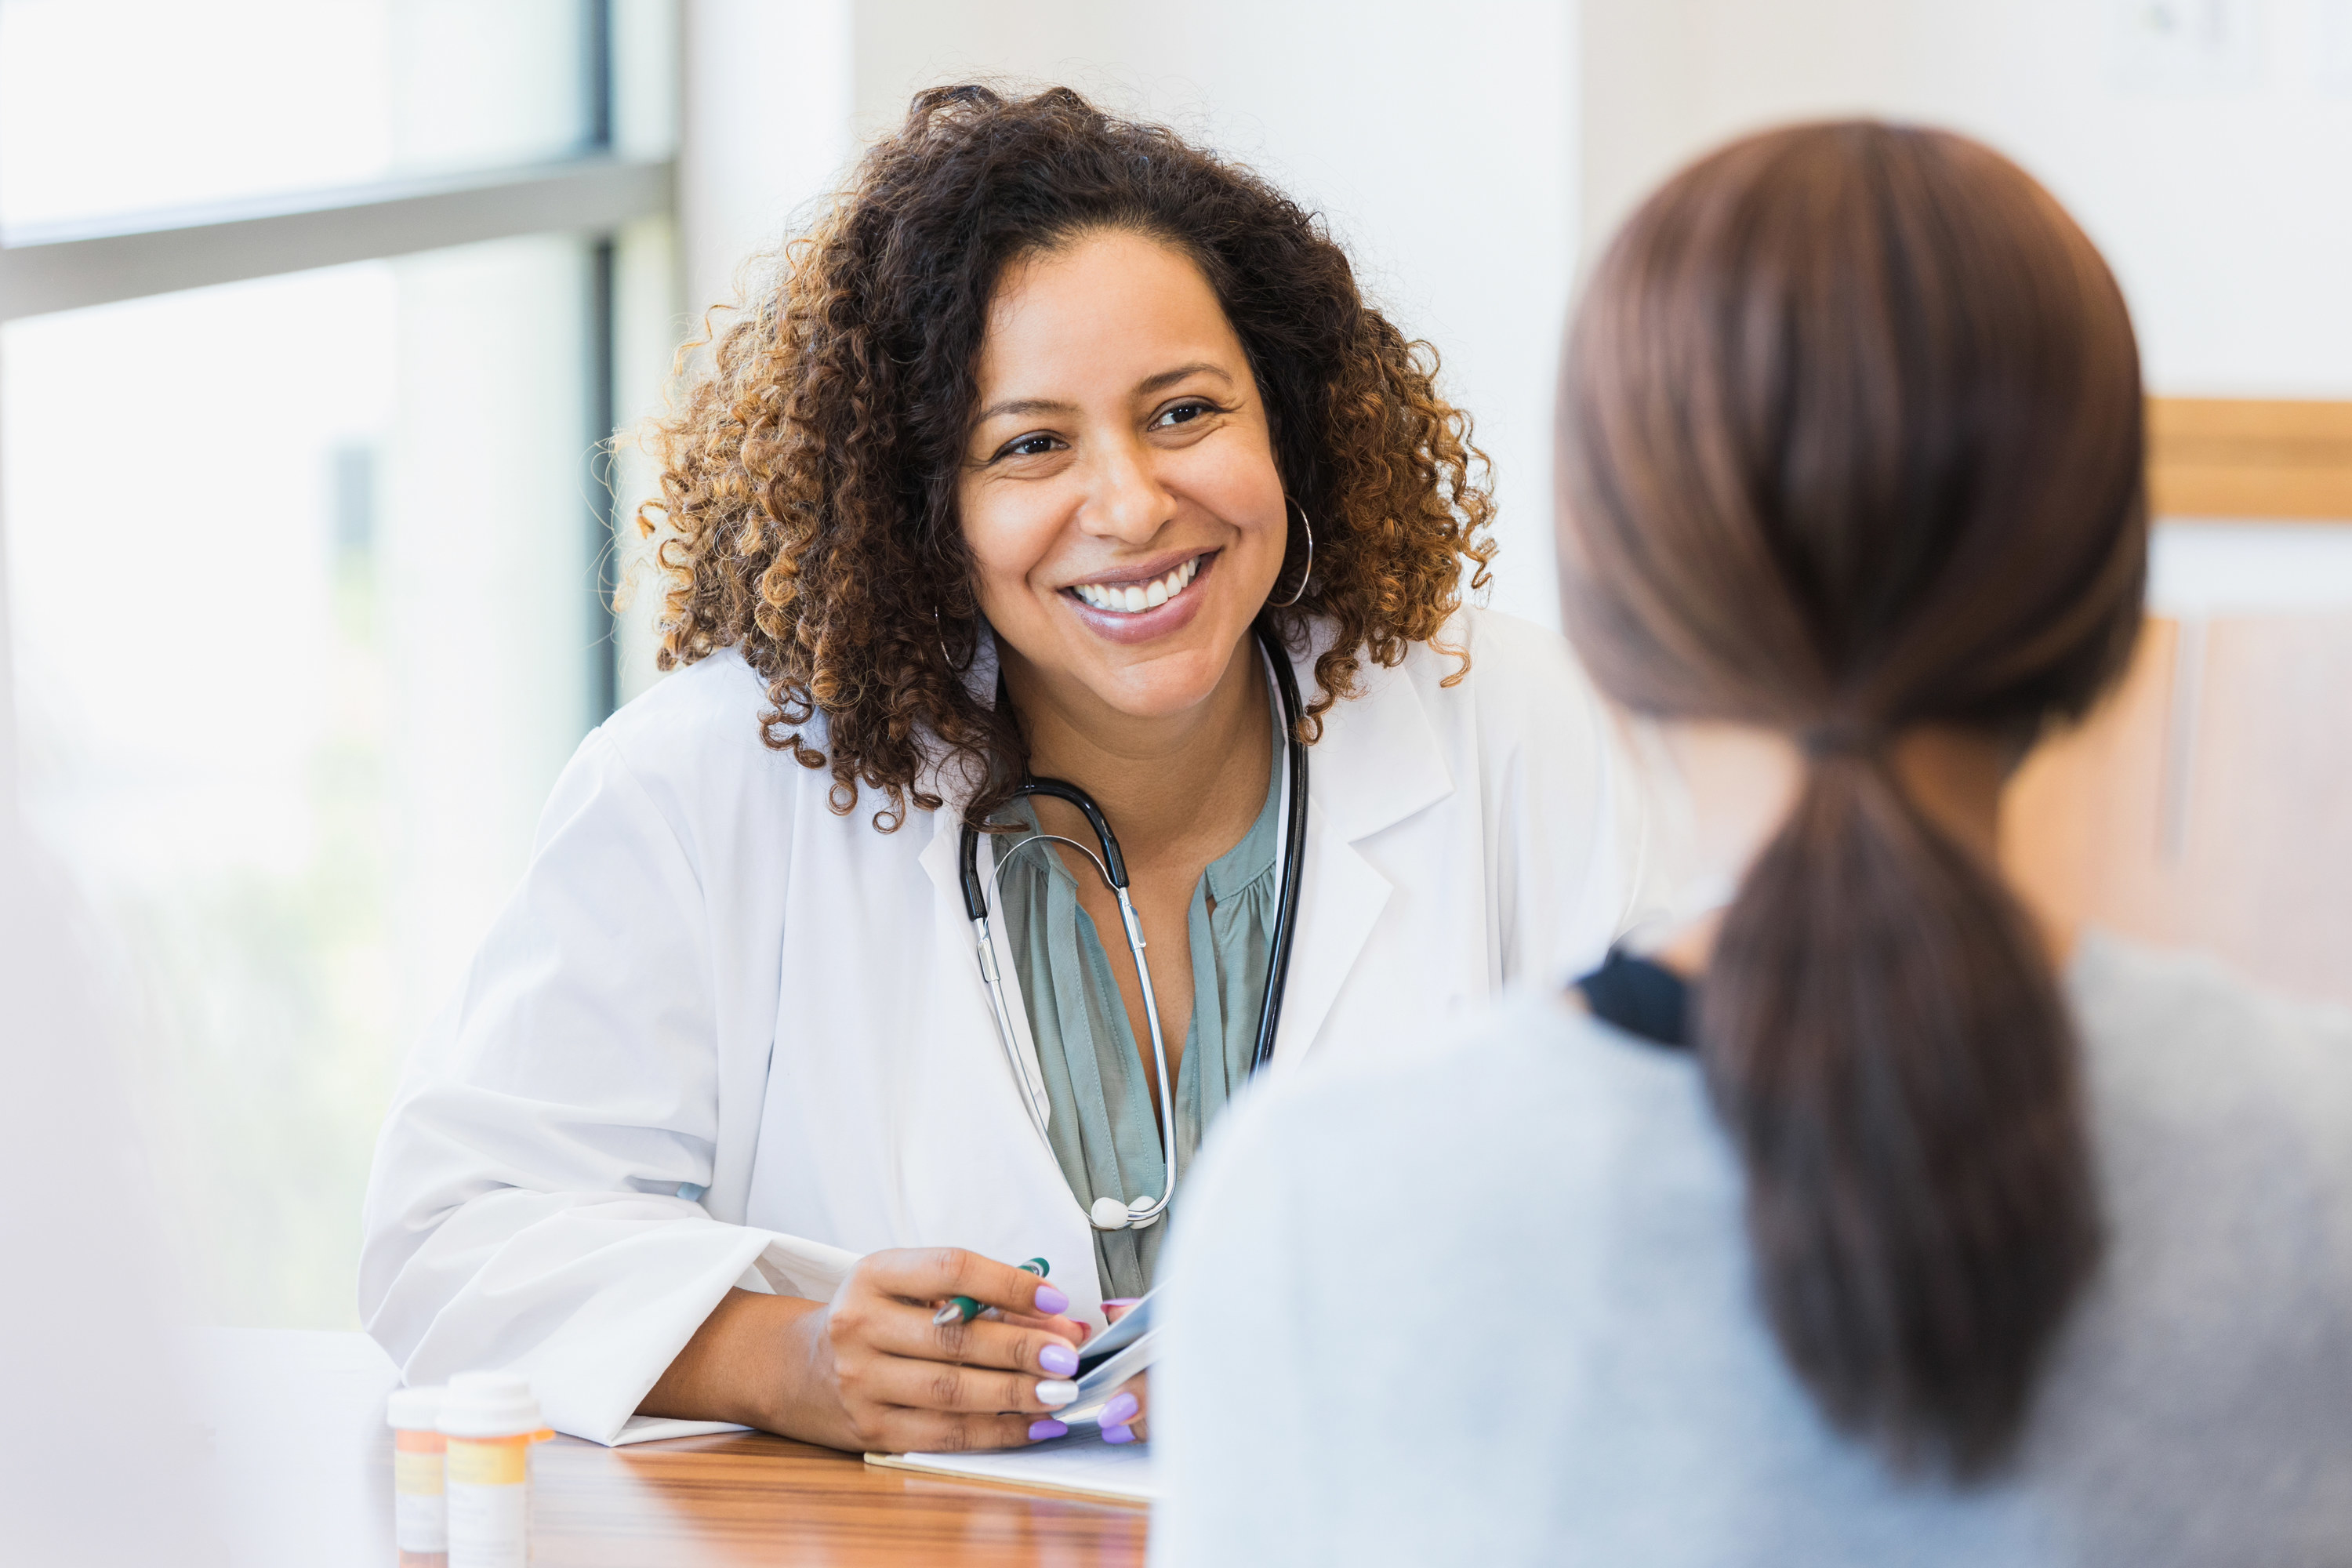 A female doctor smiles as she speaks with a patient